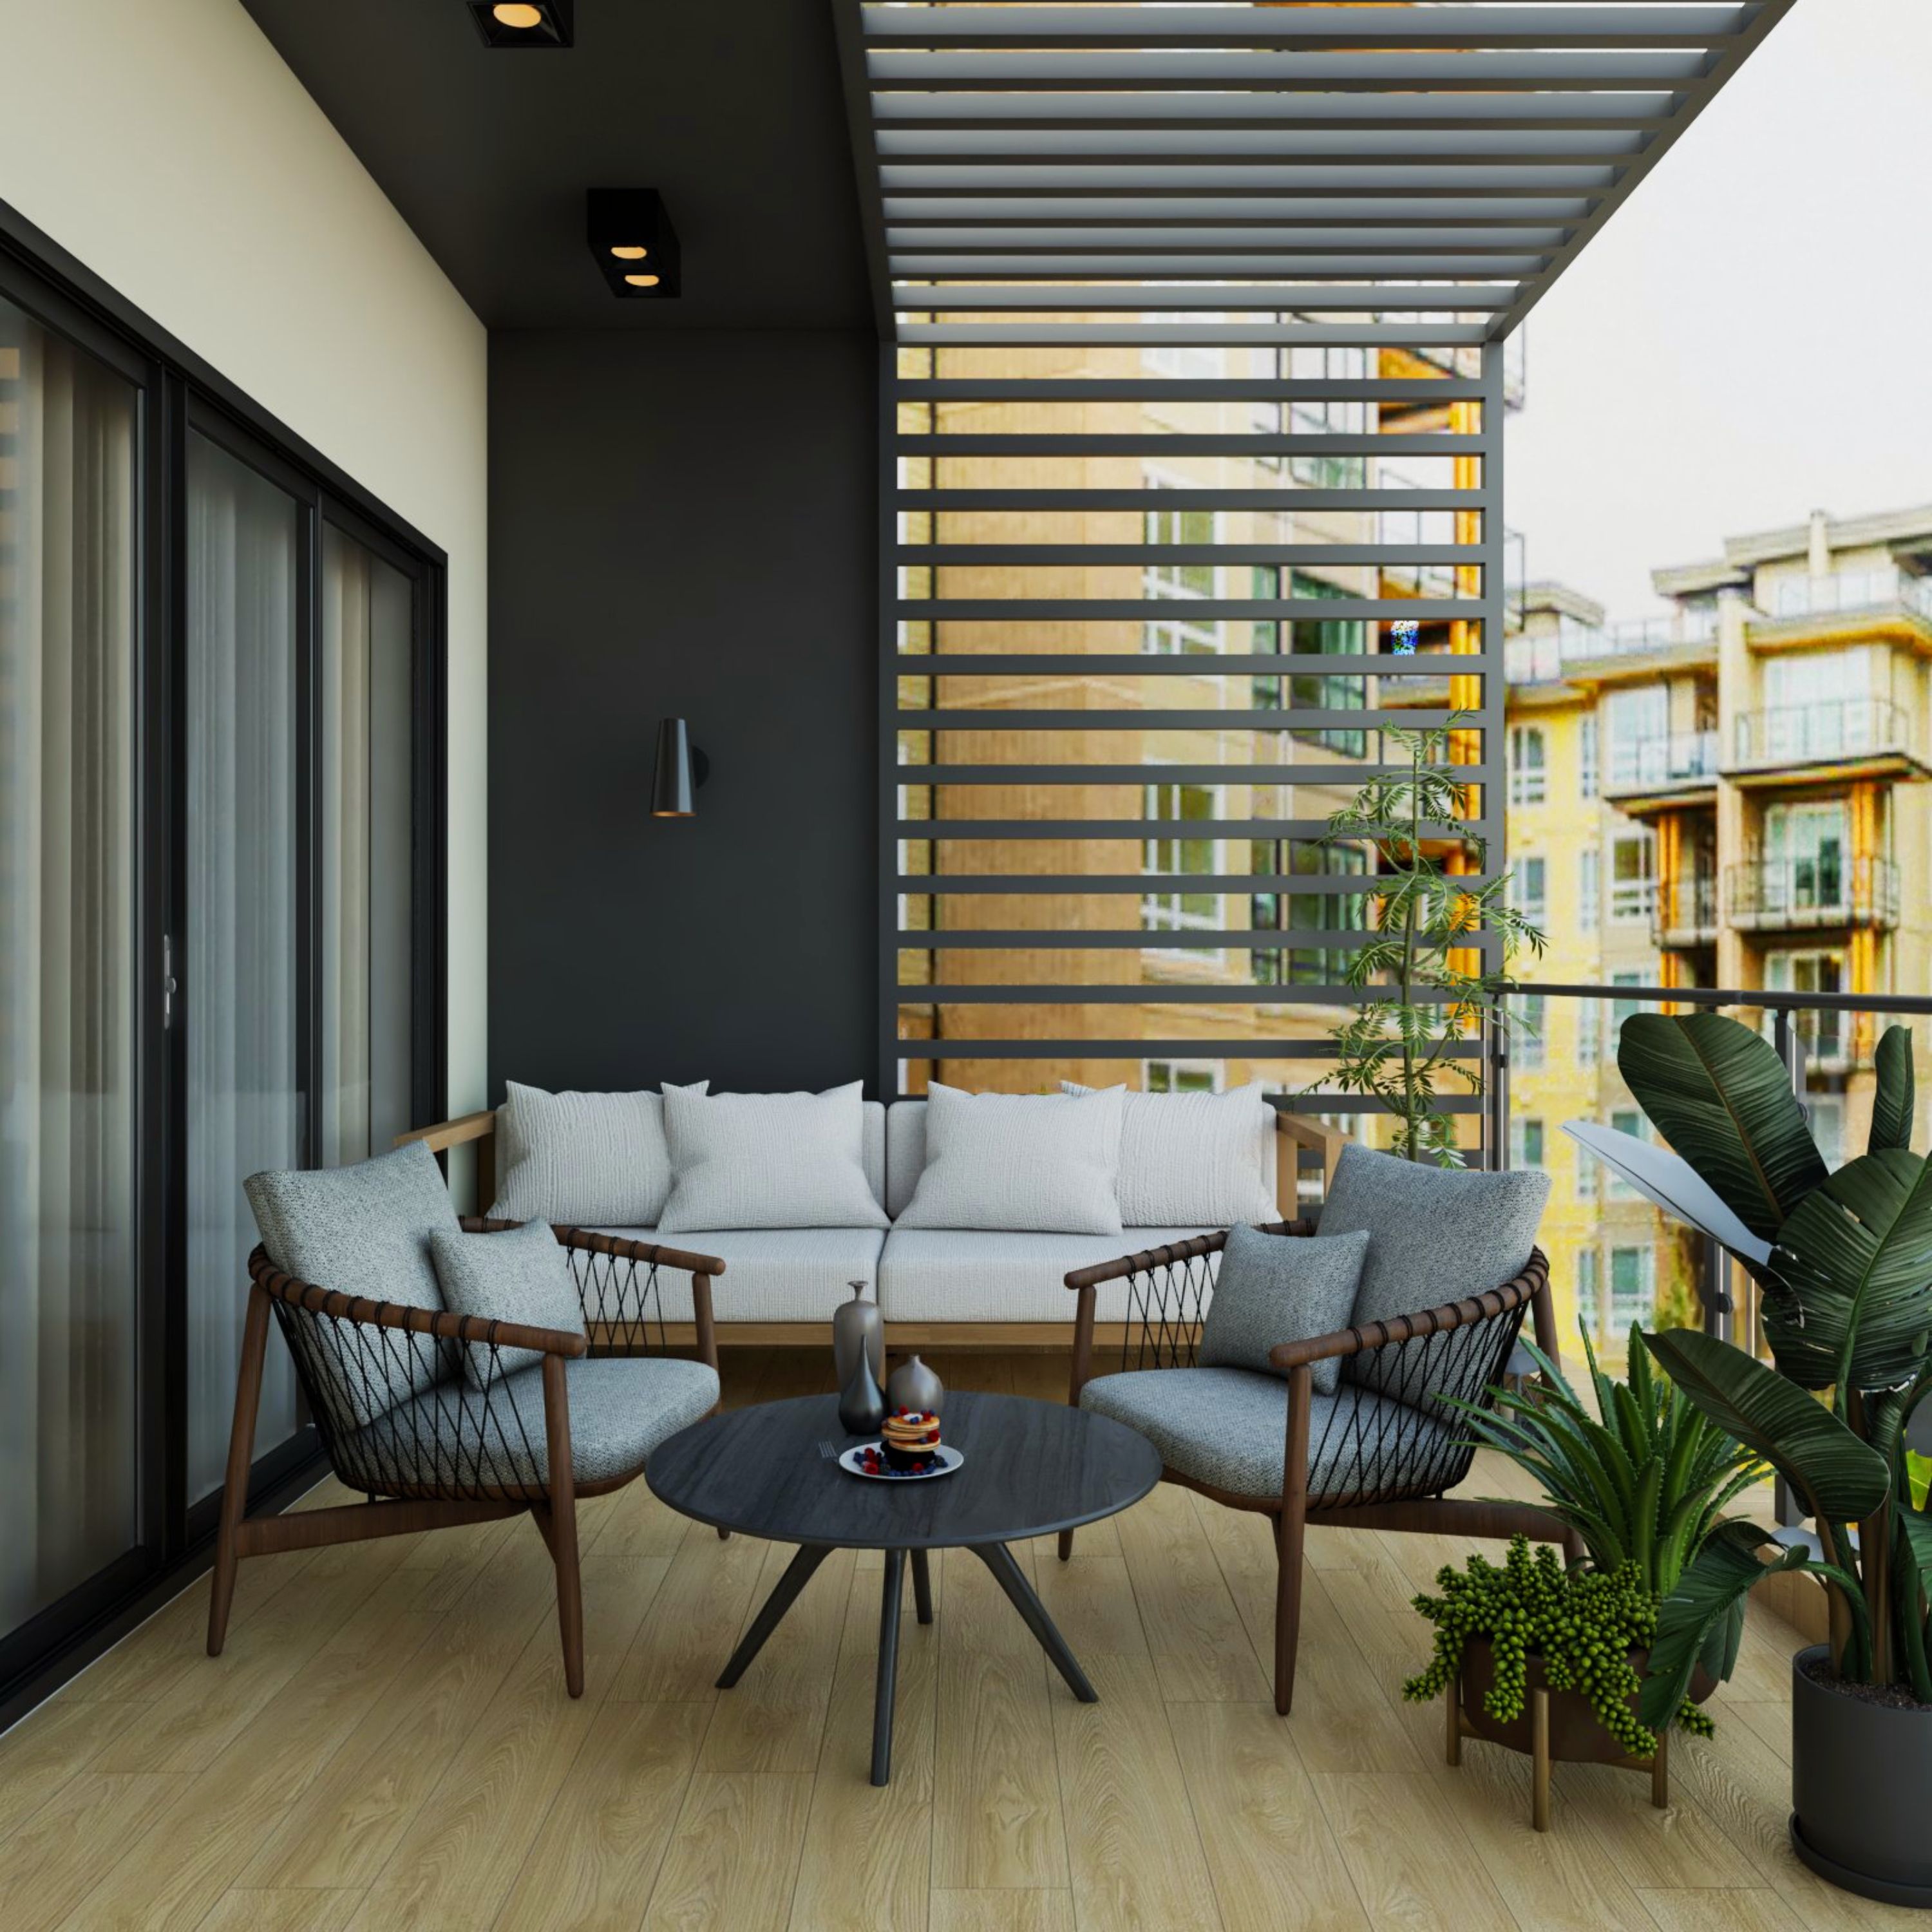 Modern Balcony Design With Dark Grey Wall Paint And Open Ledges